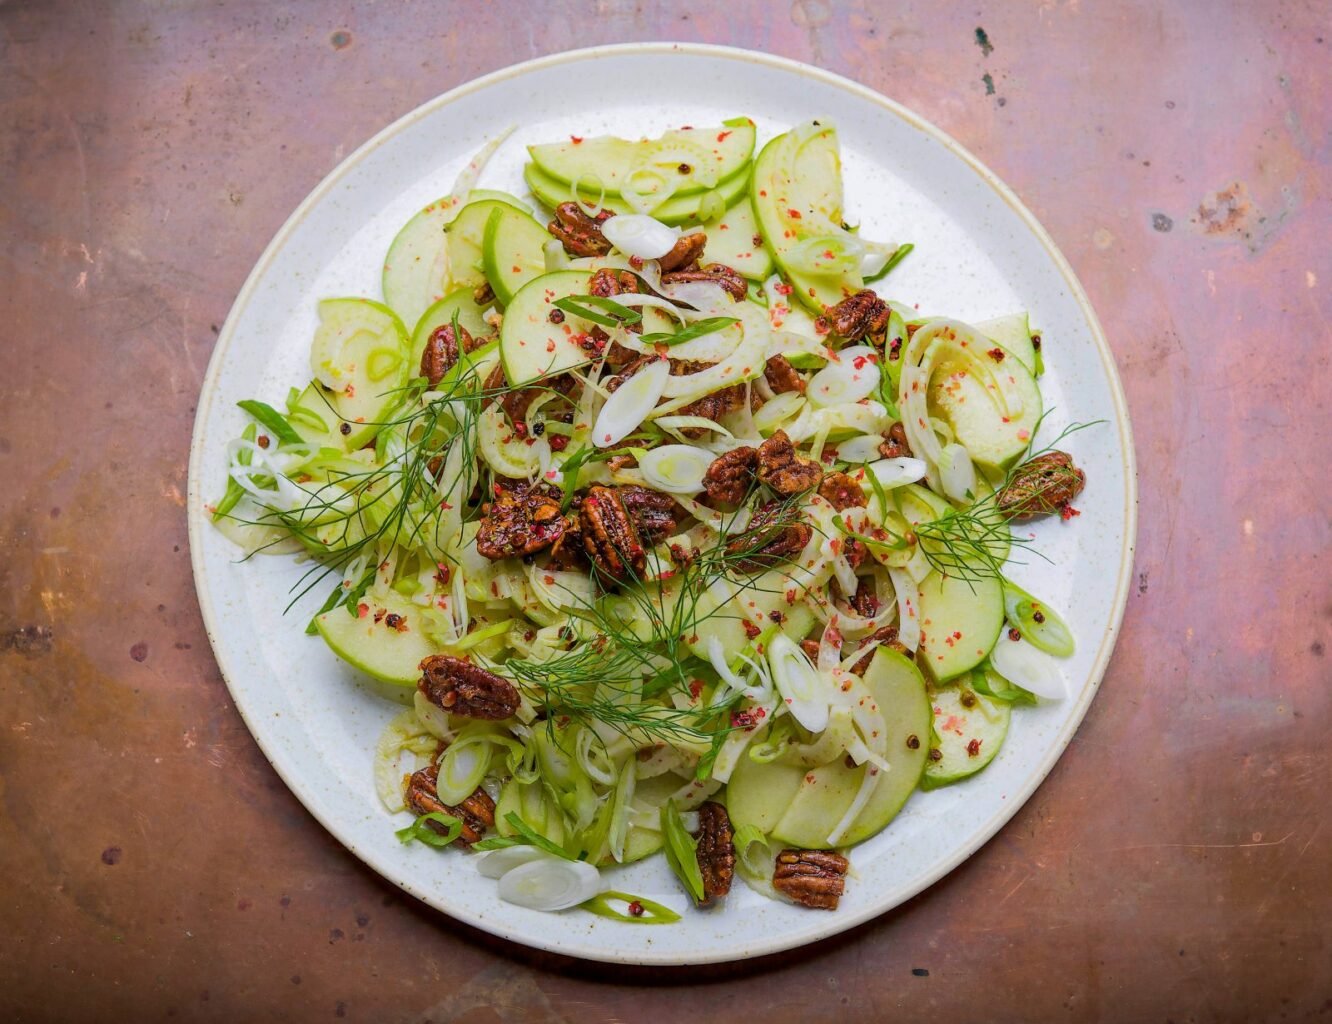 Apple-Fennel Salad with Candied Pecans by Christopher Kimball's Milk Street. © 2018 Christopher Kimball’s Milk Street. All Rights Reserved.